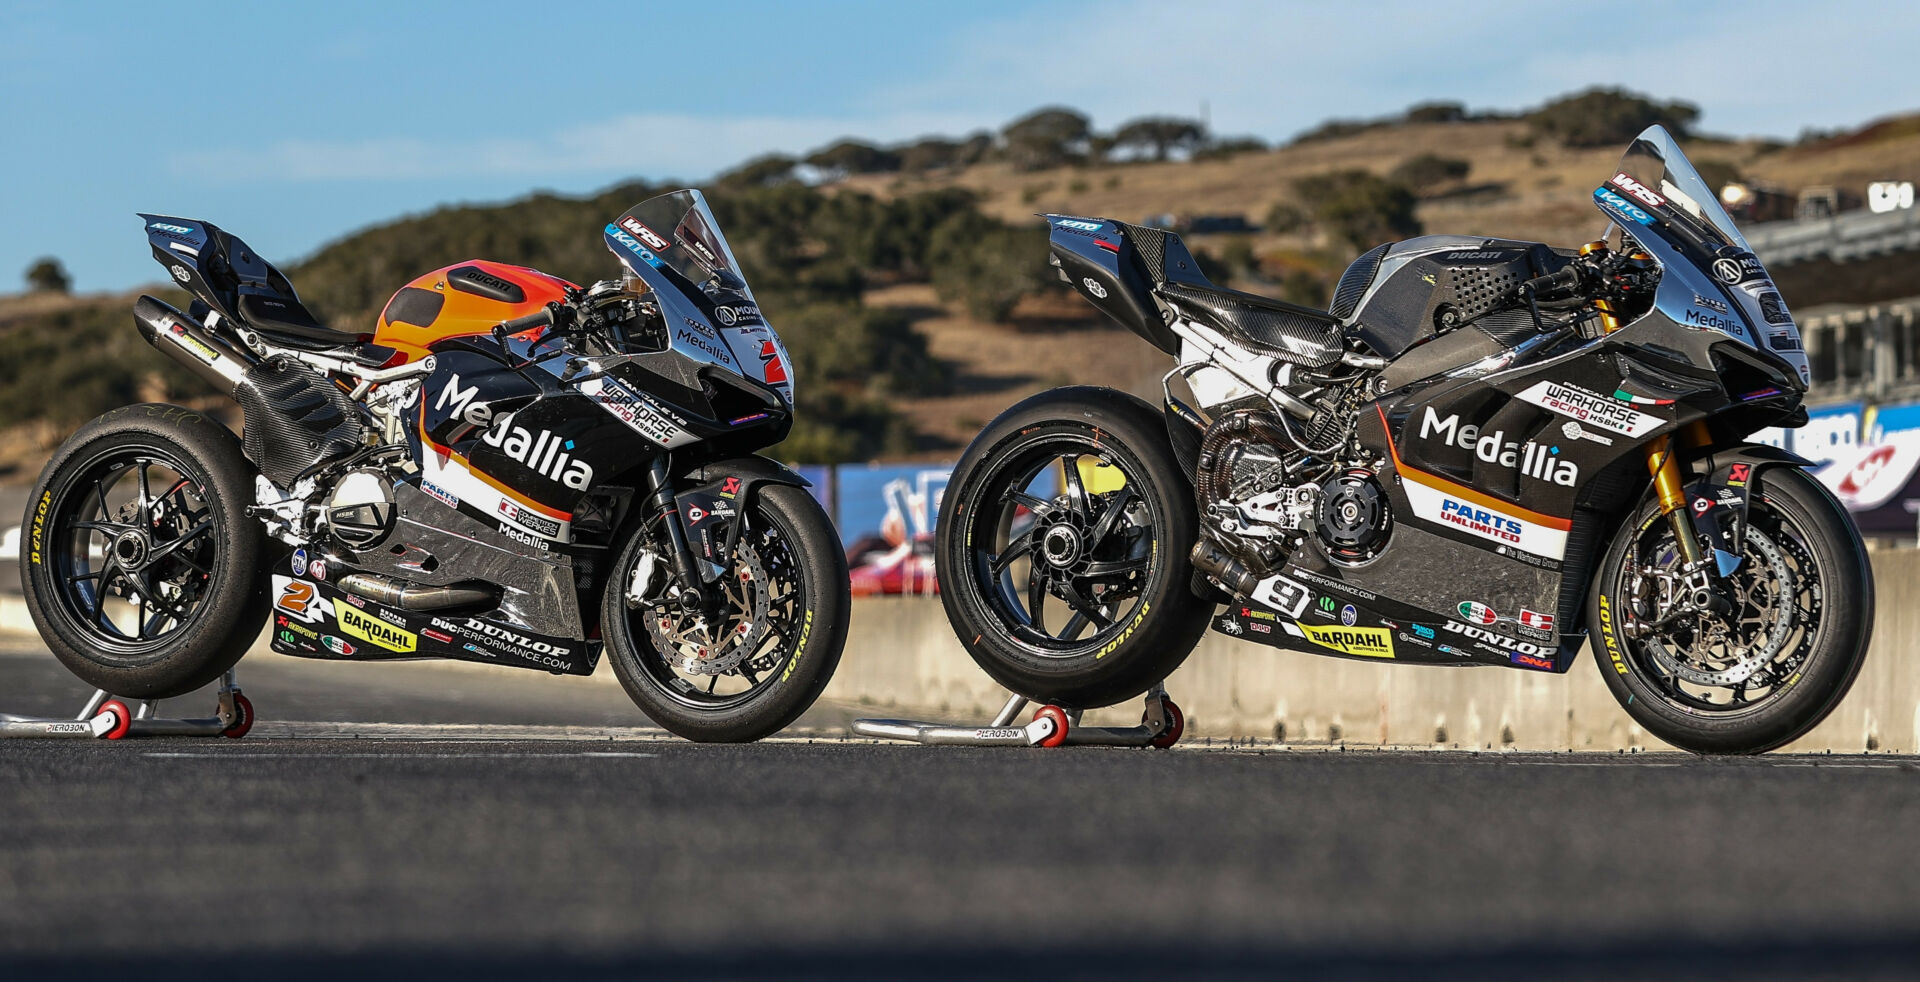 The Warhorse HSBK Racing Ducati NYC Panigales of Danilo Petrucci (right) and Josh Herrin (left) at WeatherTech Raceway Laguna Seca with their special Medallia liveries. Photo by Brian J. Nelson, courtesy Ducati North America.